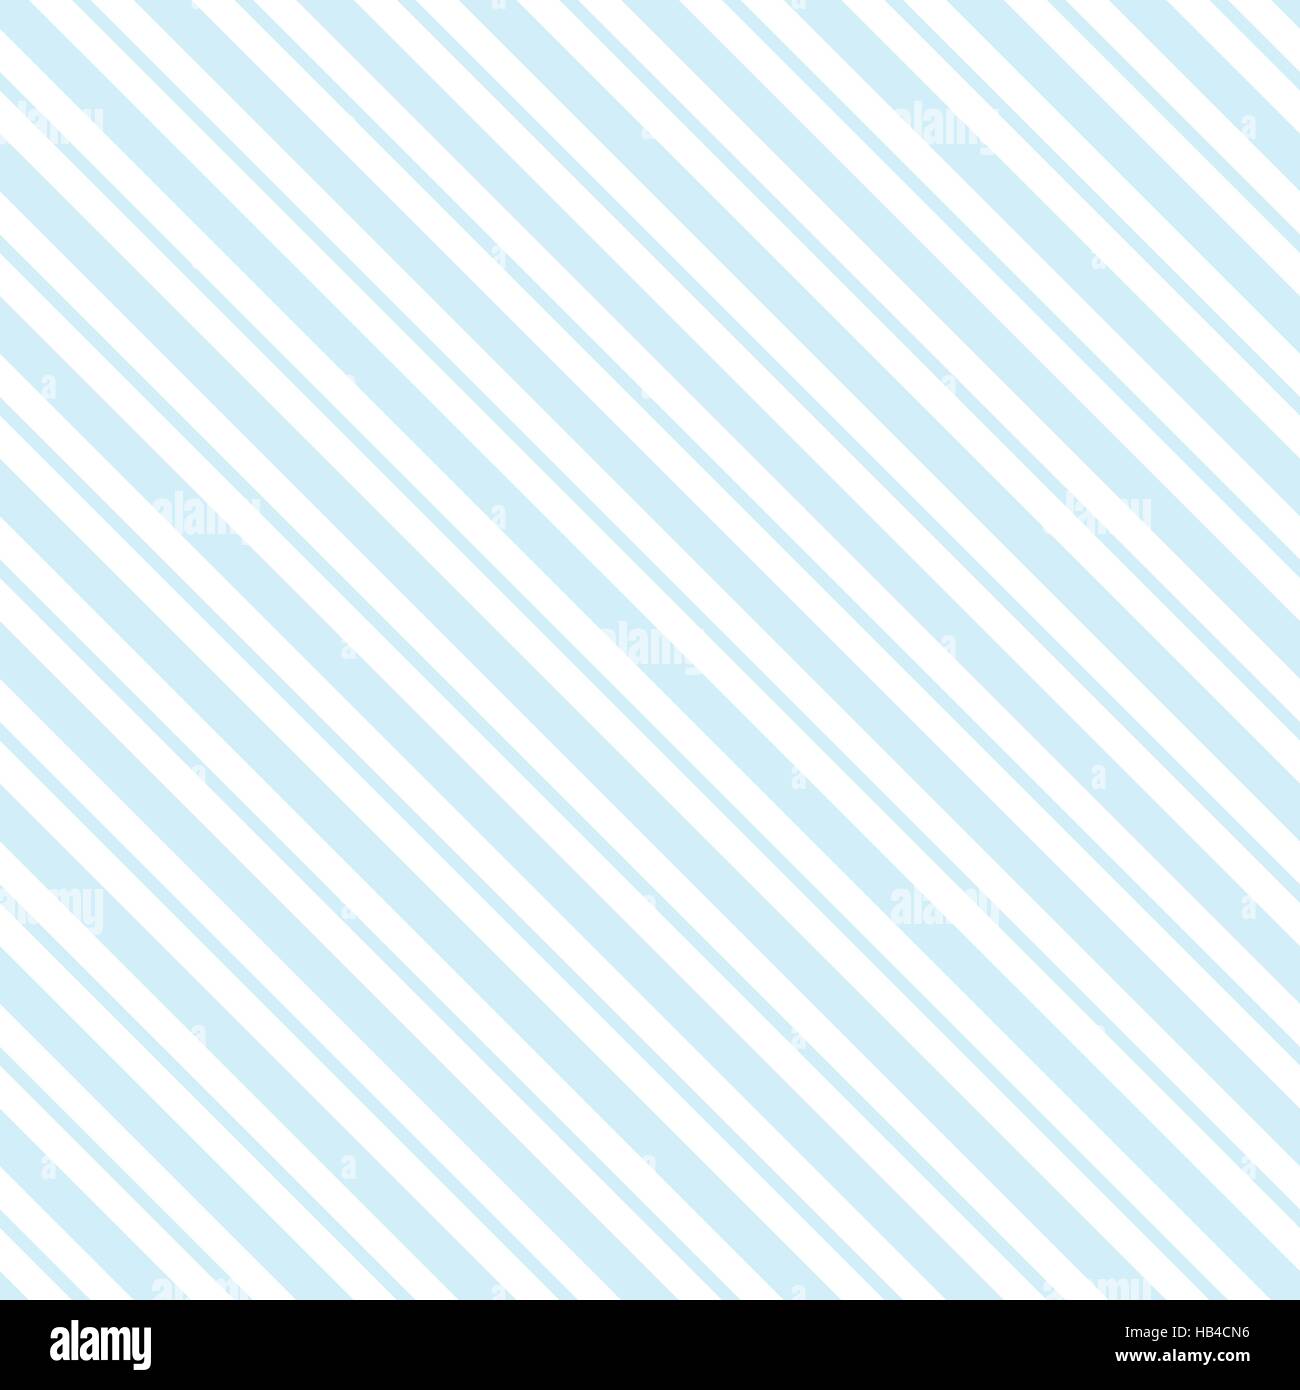 Blue seamless tilted striped pattern packaging paper background in vector format Stock Vector